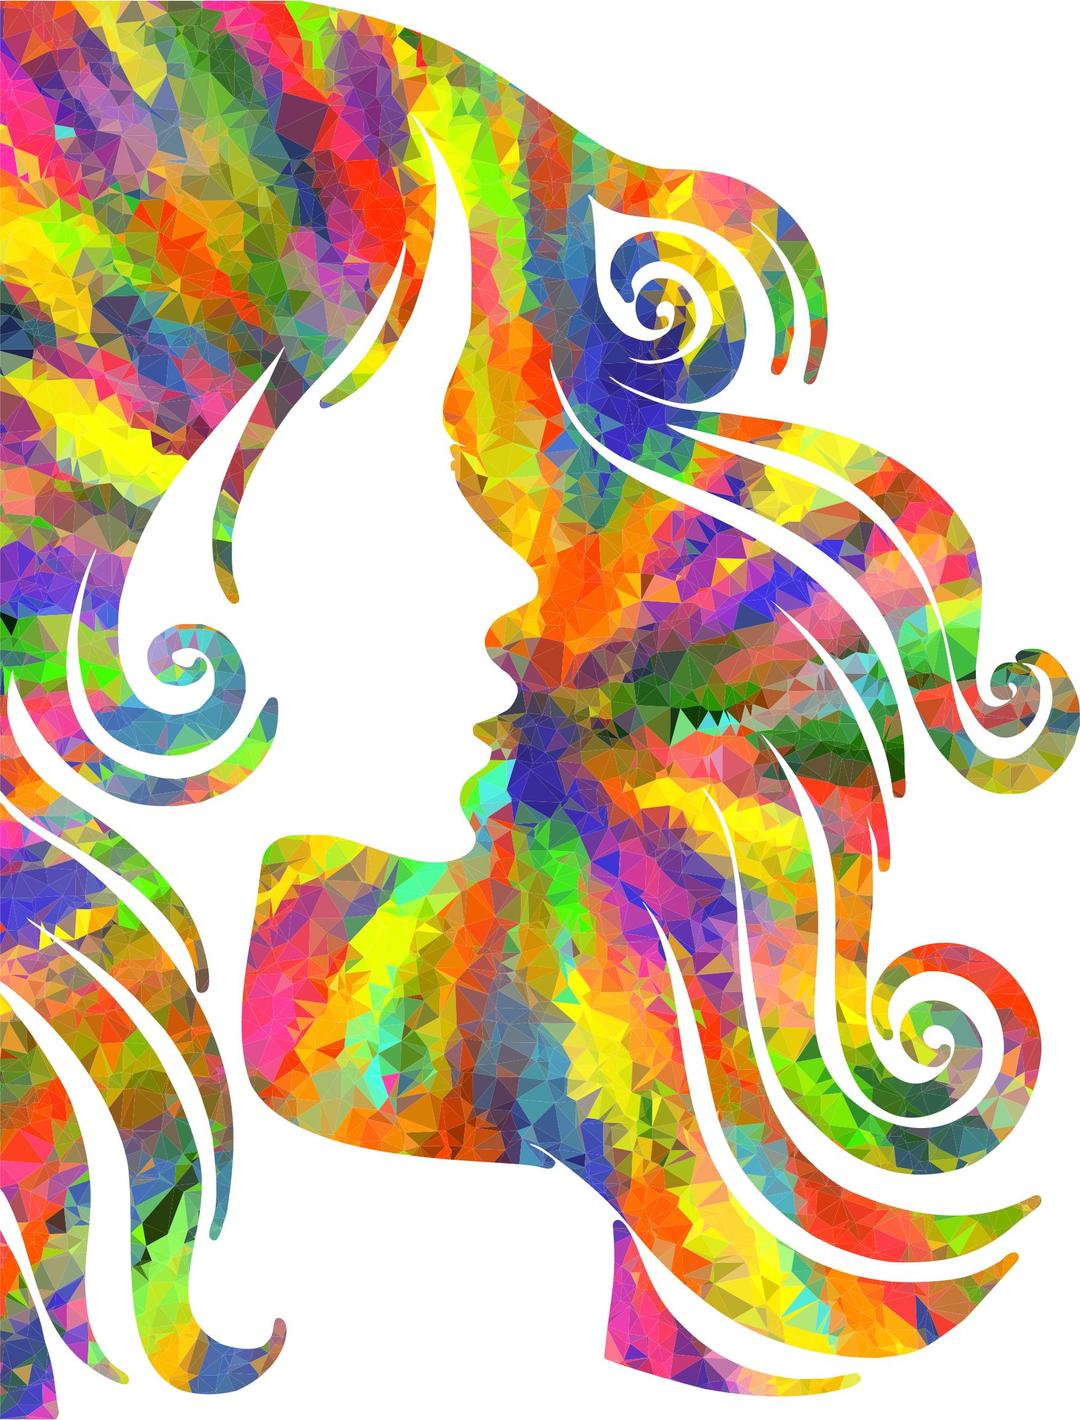 Low Poly Splash Of Color Female Hair Profile Silhouette png transparent